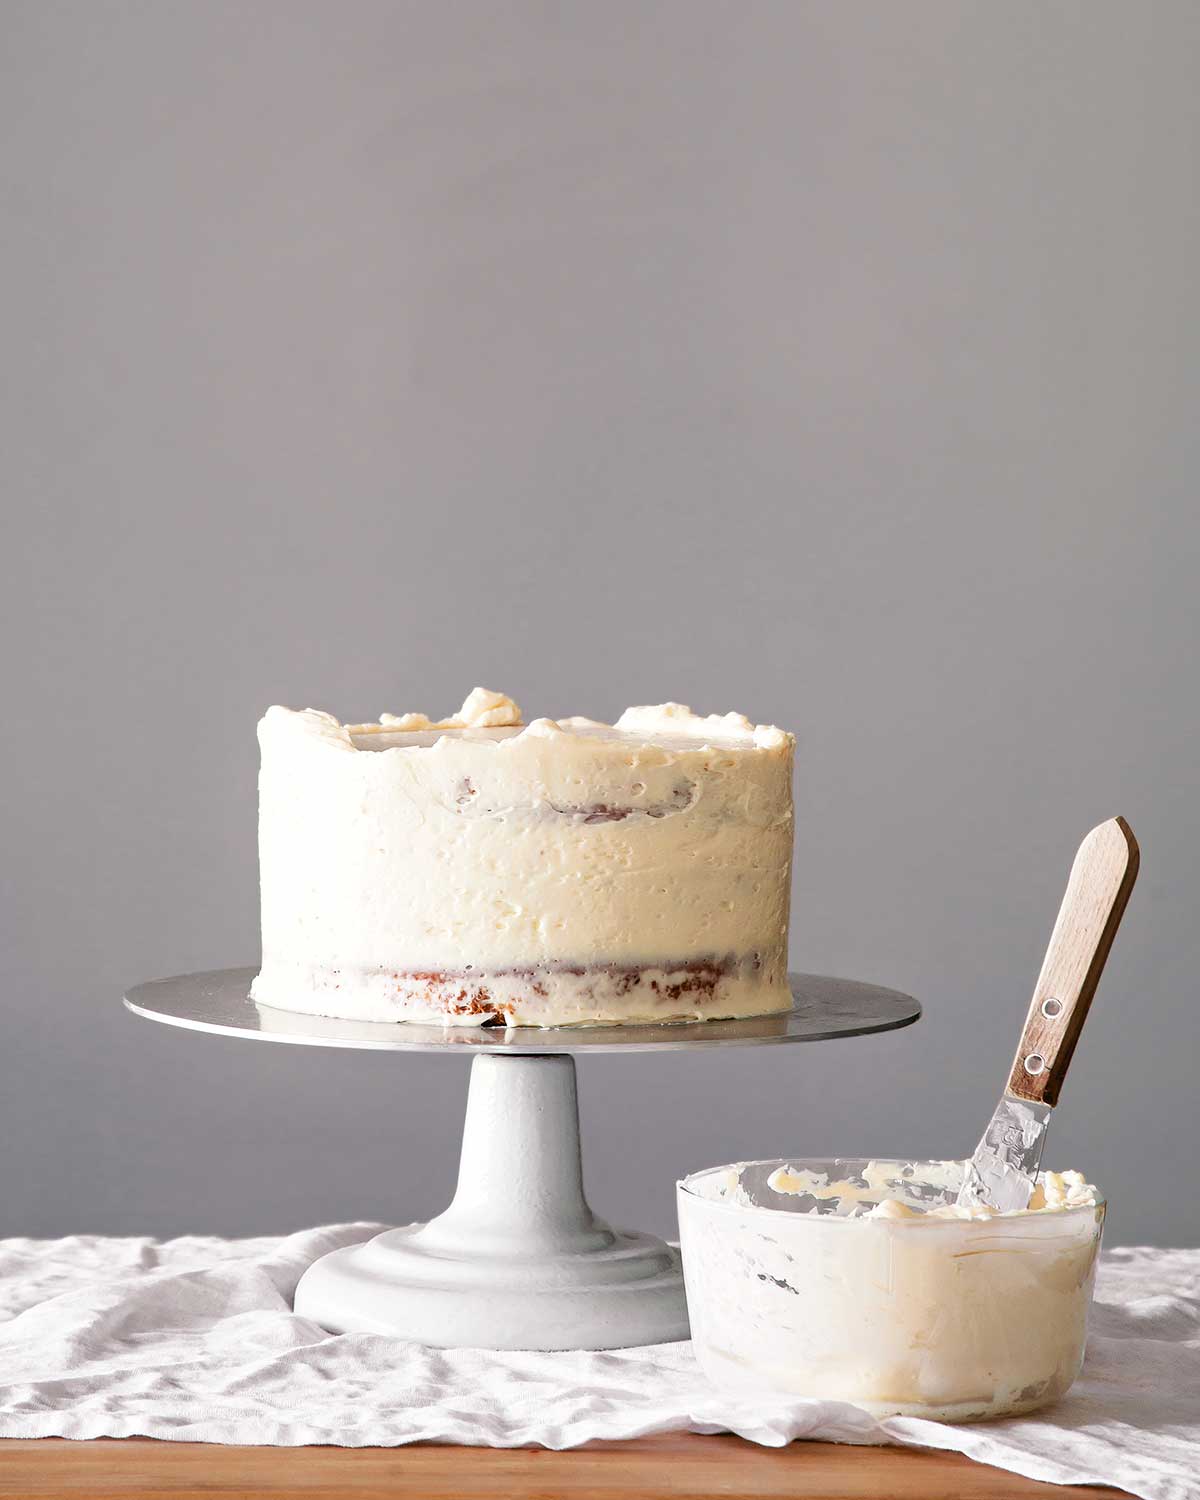 A partially frosted cake on a cake stand with a bowl of frosting and spatula on the side.